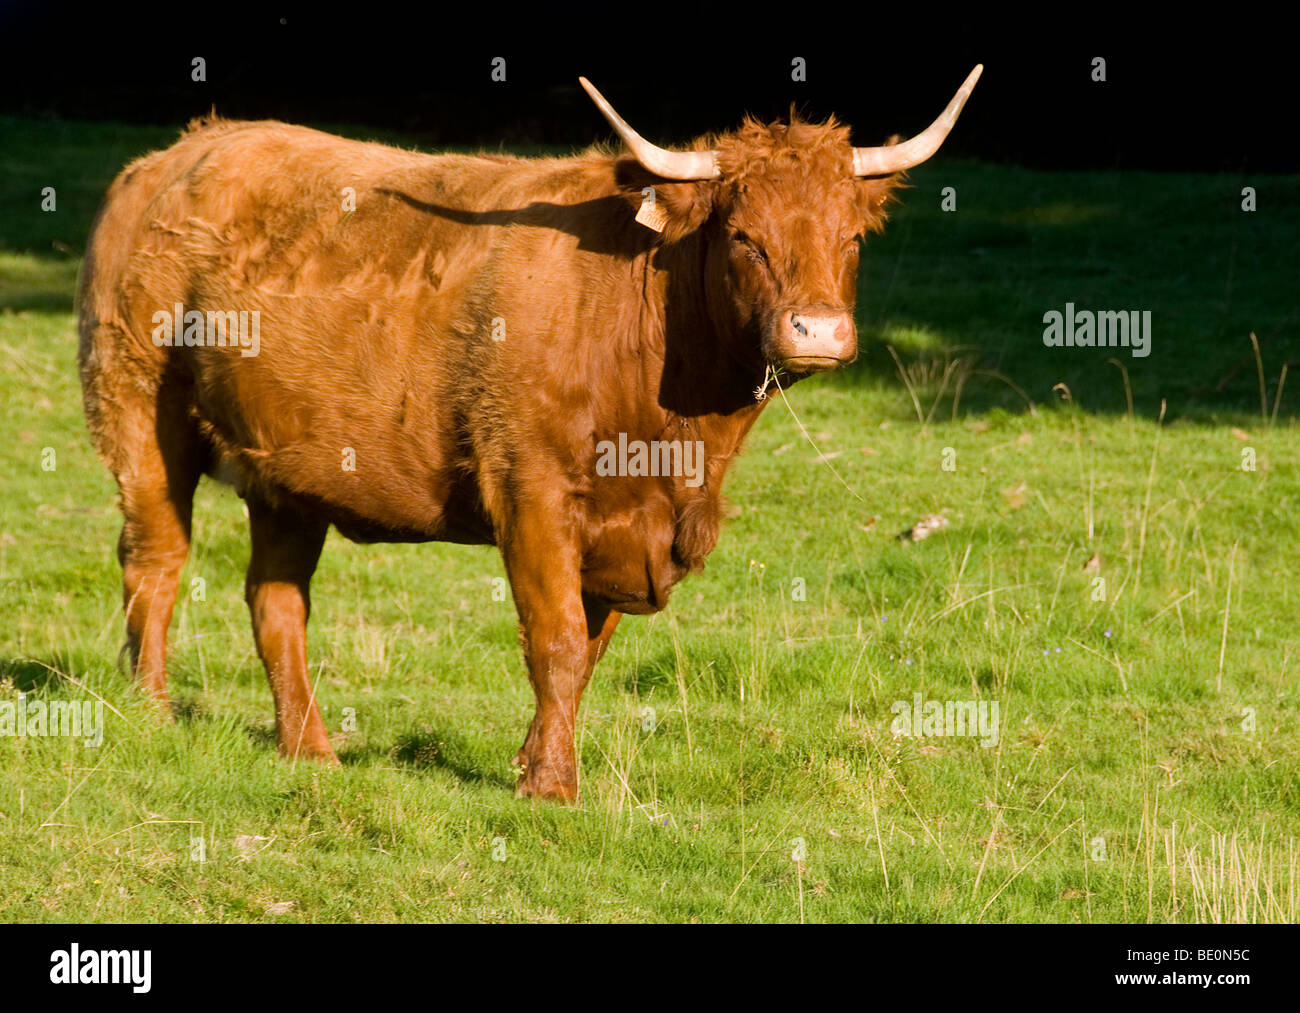 A Salers cow in field Stock Photo